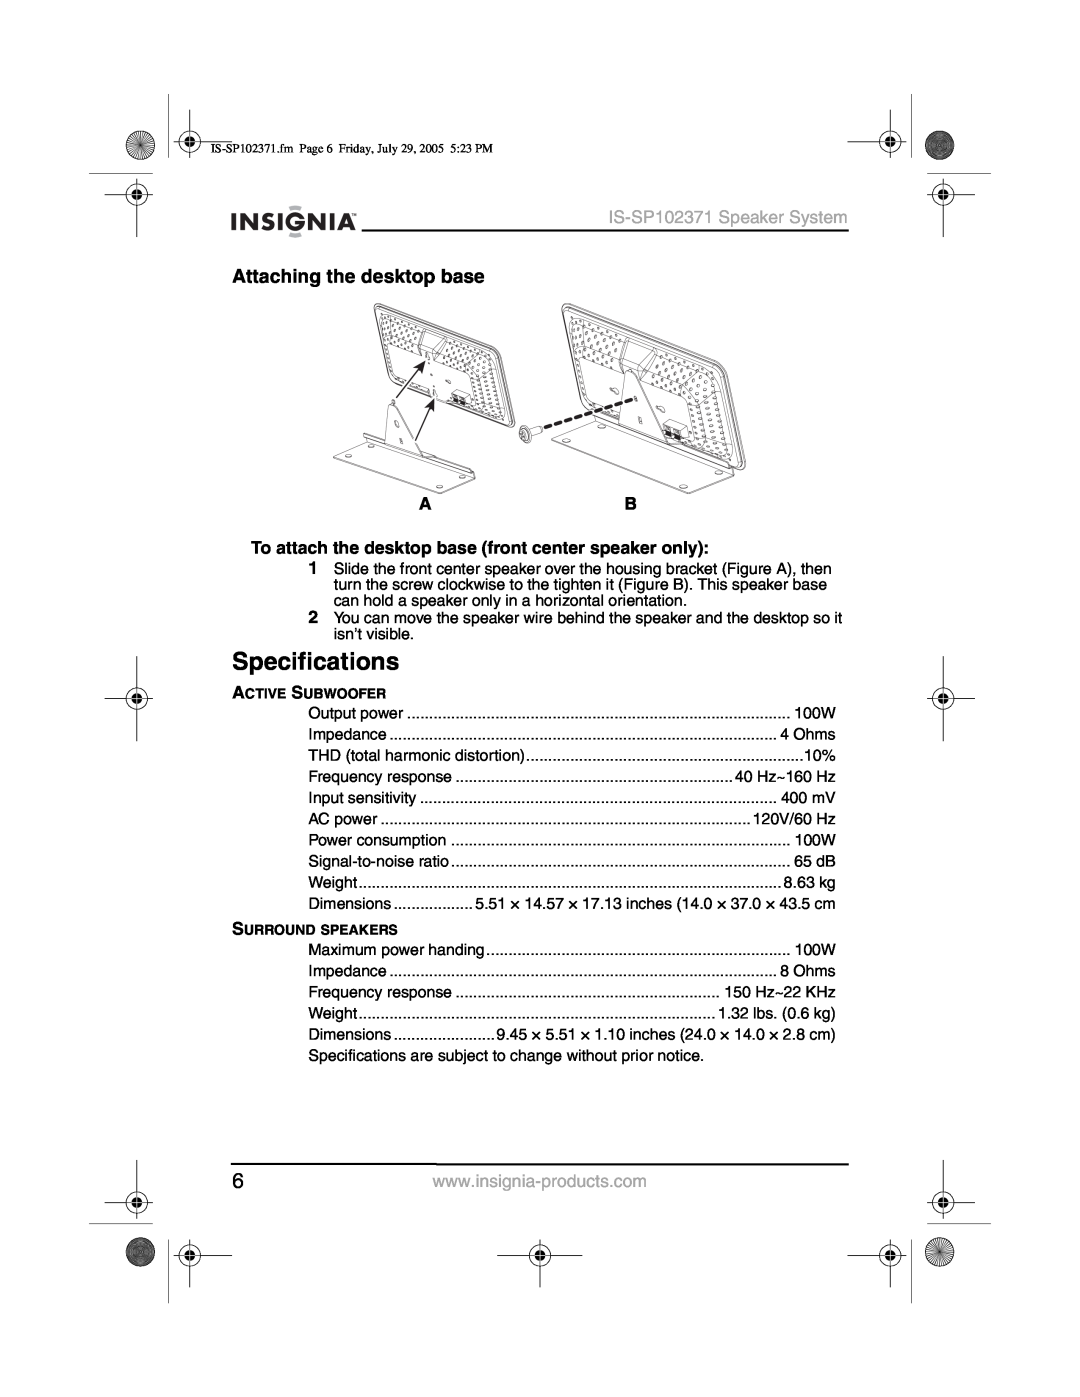 Insignia manual Specifications, Attaching the desktop base, IS-SP102371Speaker System 